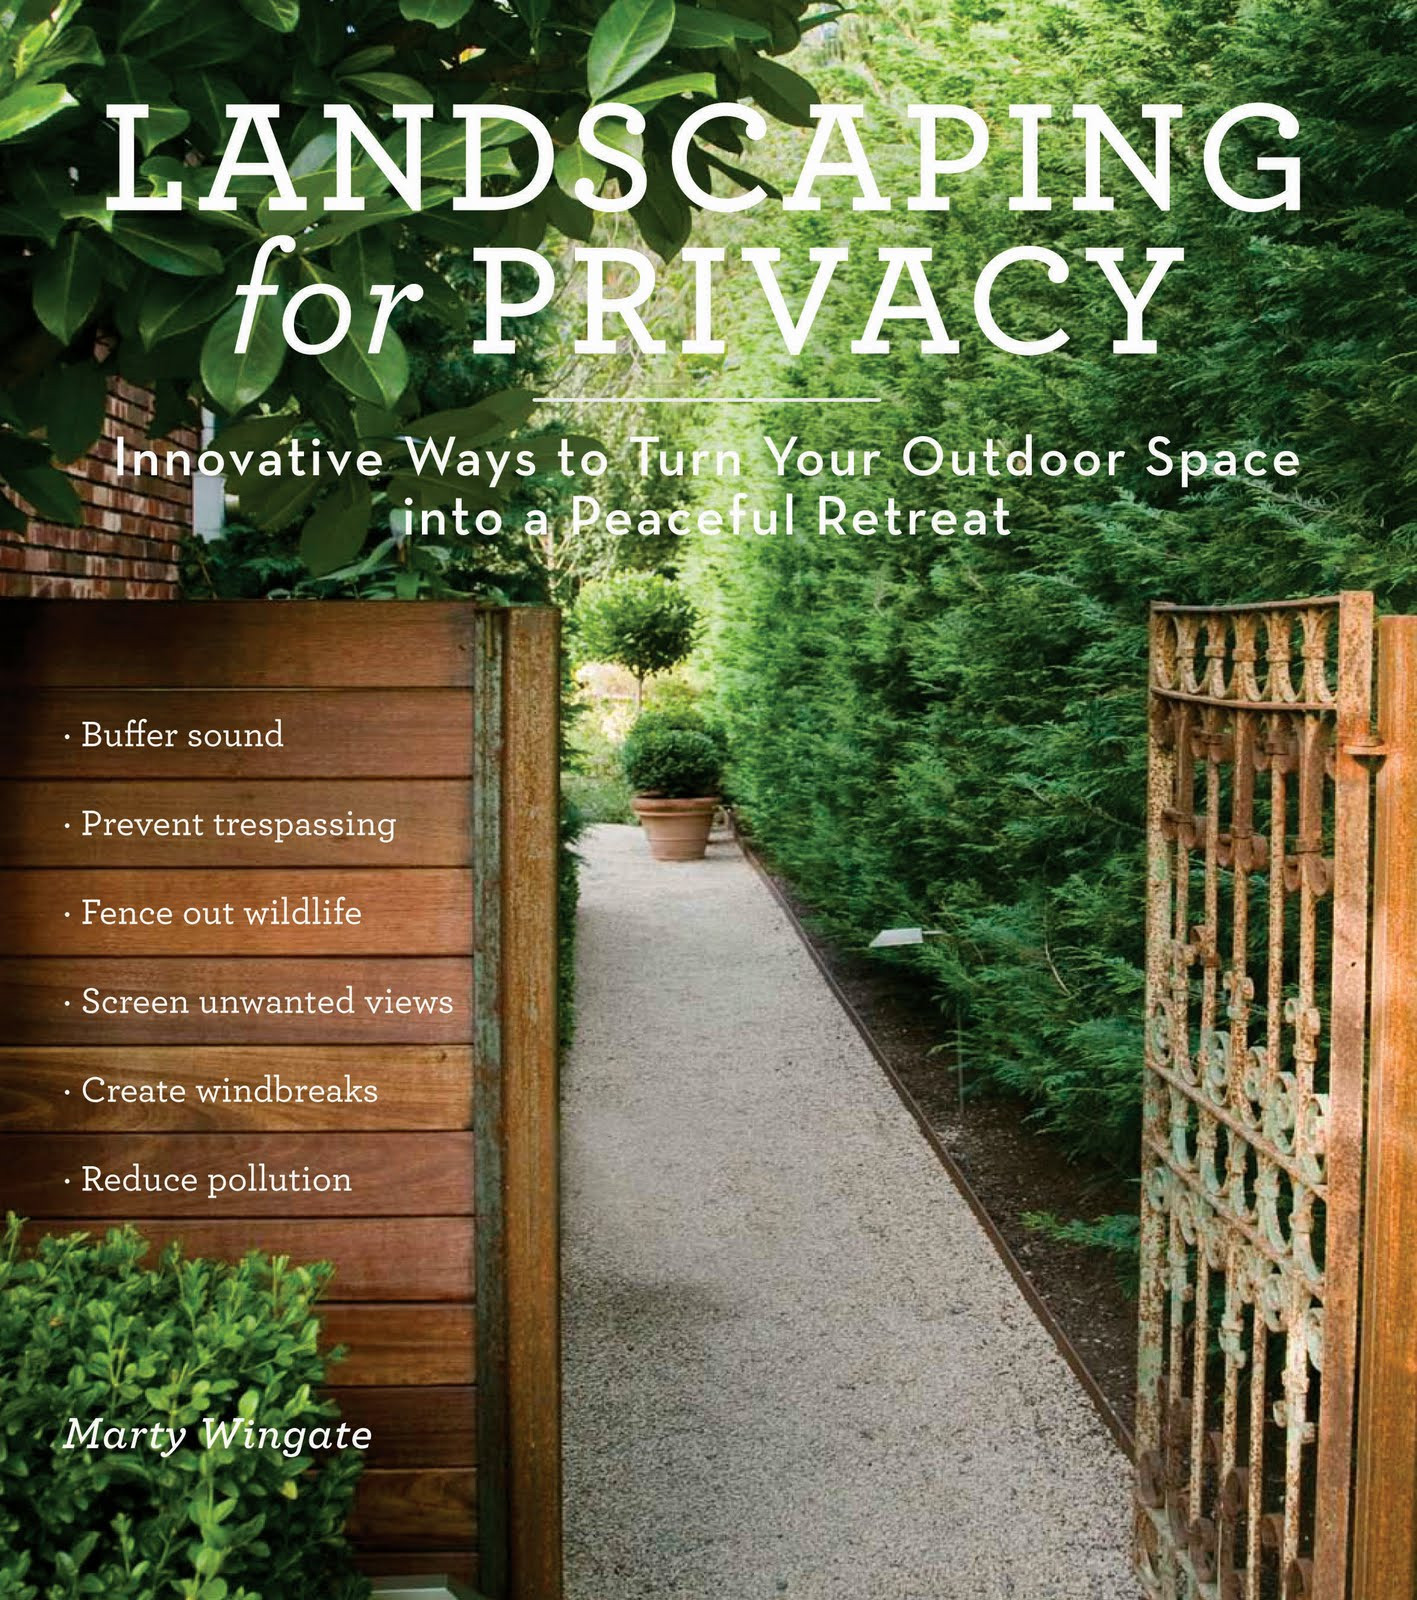 Backyard Privacy Landscaping
 danger garden Landscaping for Privacy Innovative Ways to